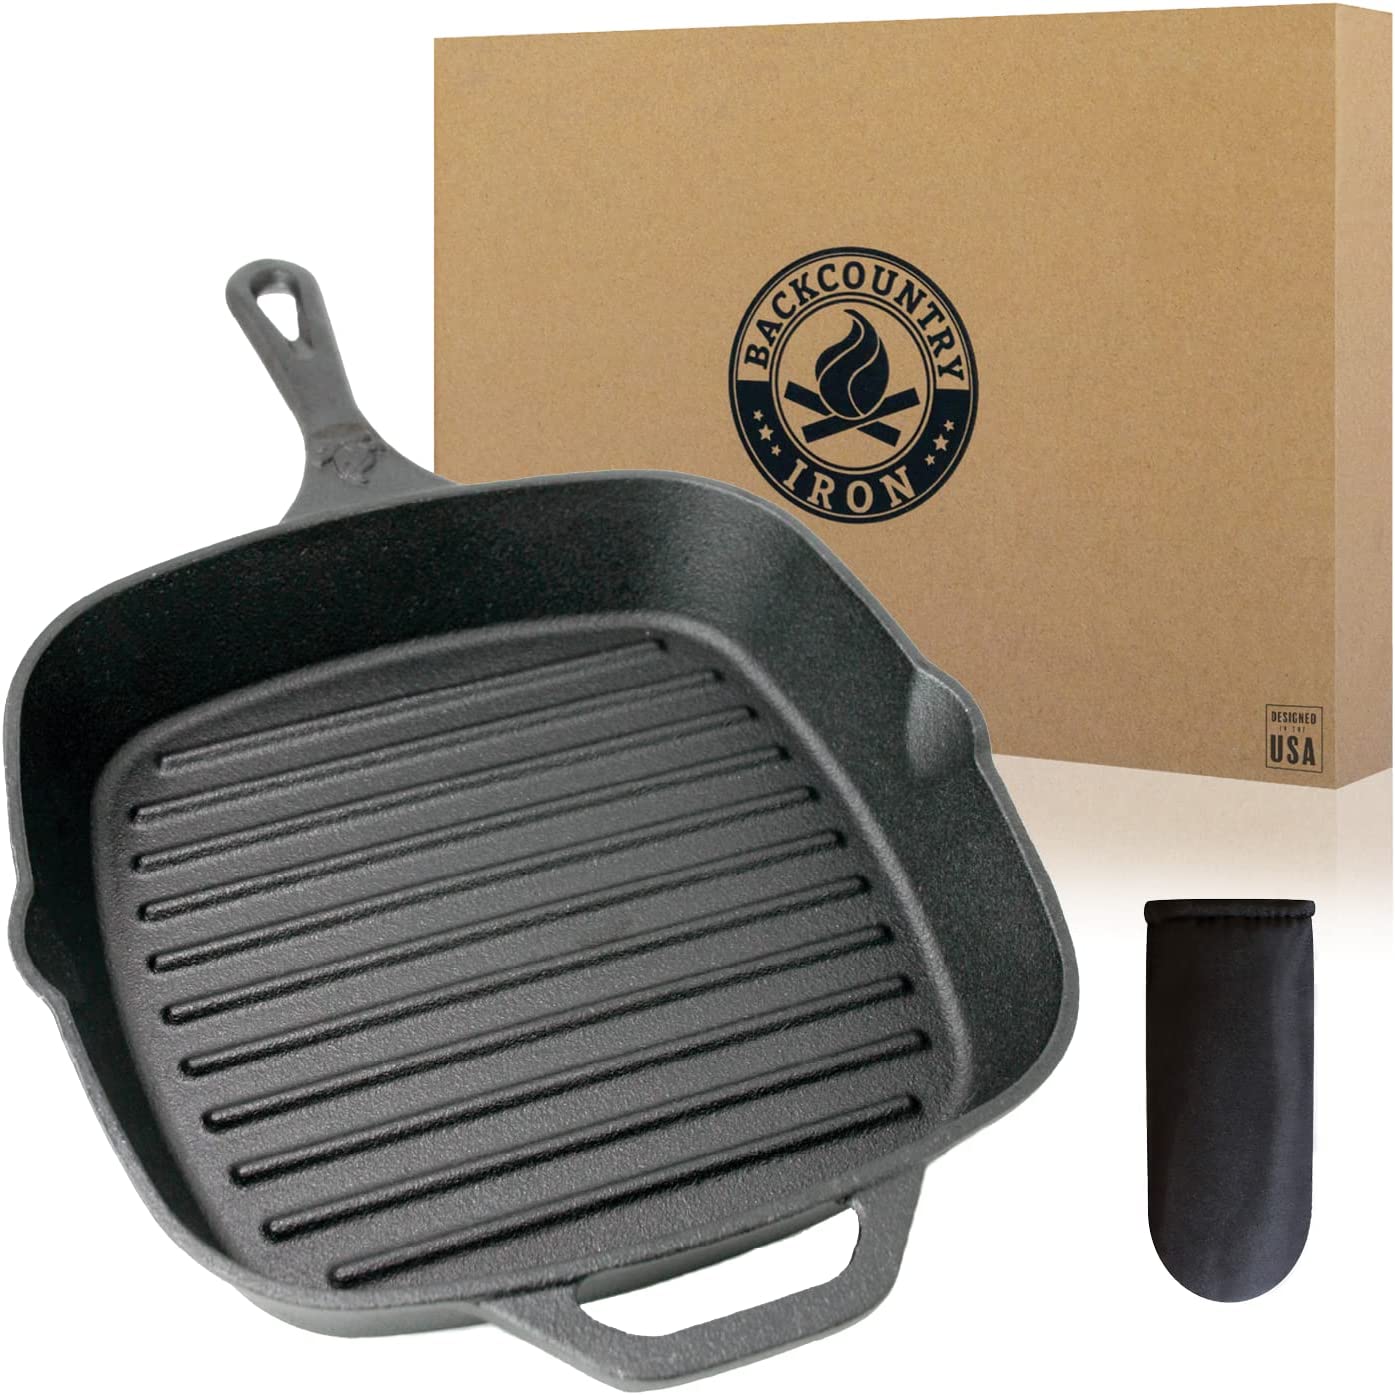 Backcountry Pour Spouts Cast Iron Grill Cookware, 8-Inch